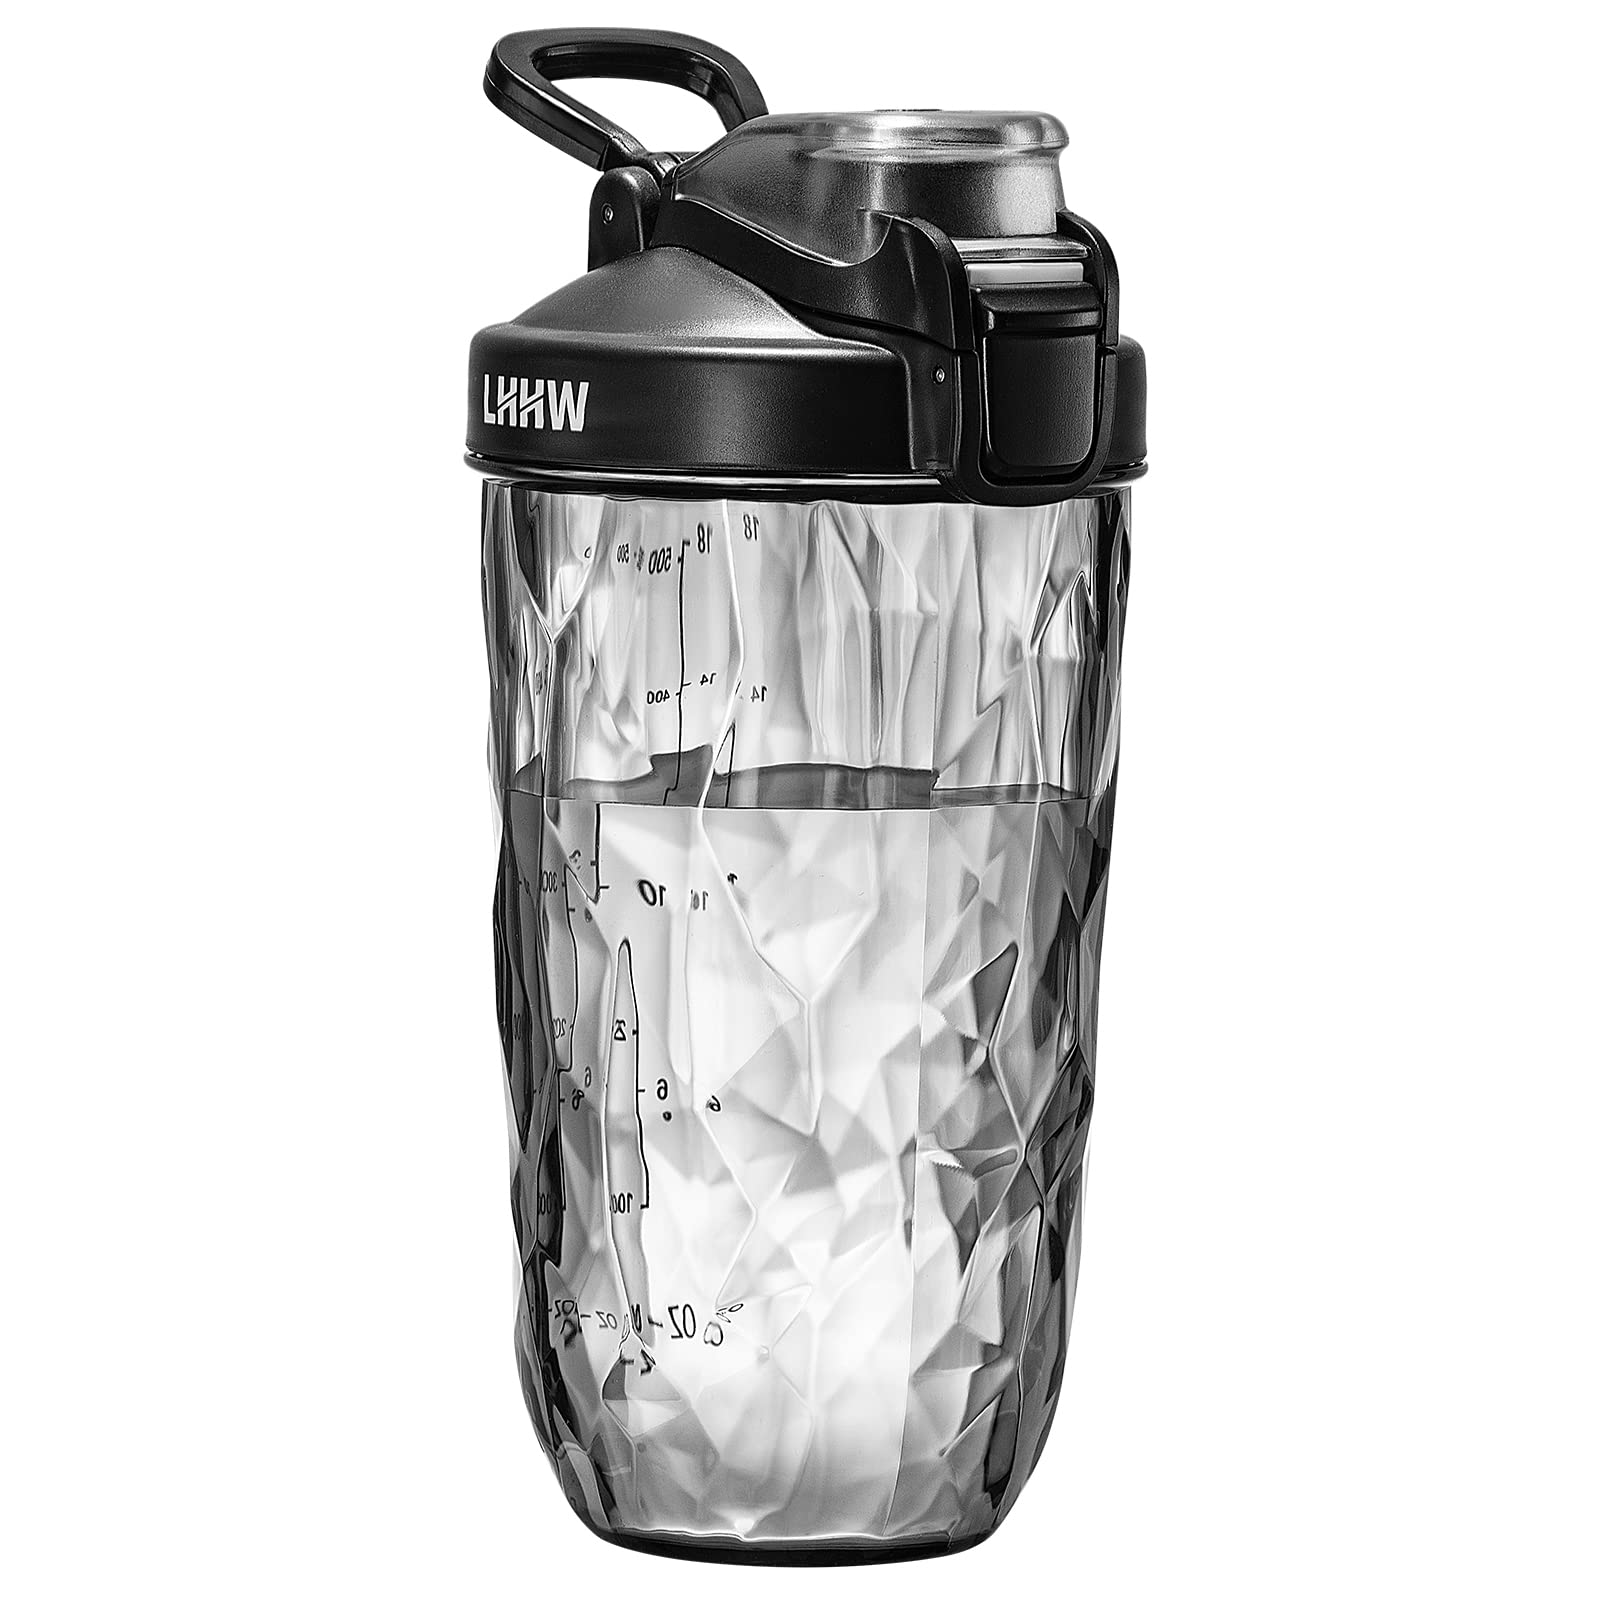 LHHW Protein Shaker Bottle Protein Shaker without ball, 650ML Nutrition Mixer with Leak Proof Design-BPA Free(Black)